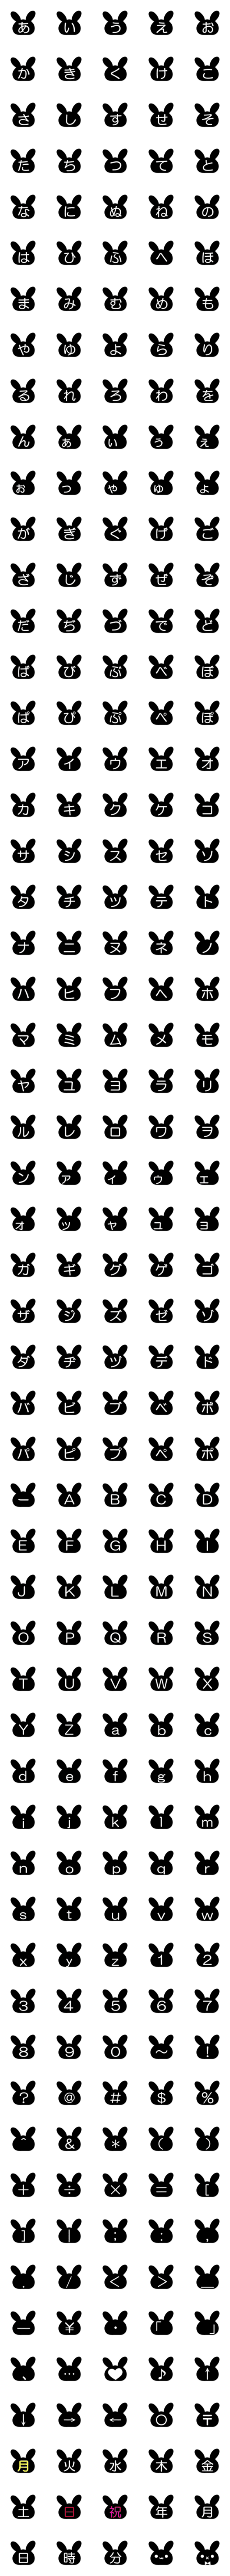 [LINE絵文字]くろうさぎのデコ文字＆絵文字の画像一覧